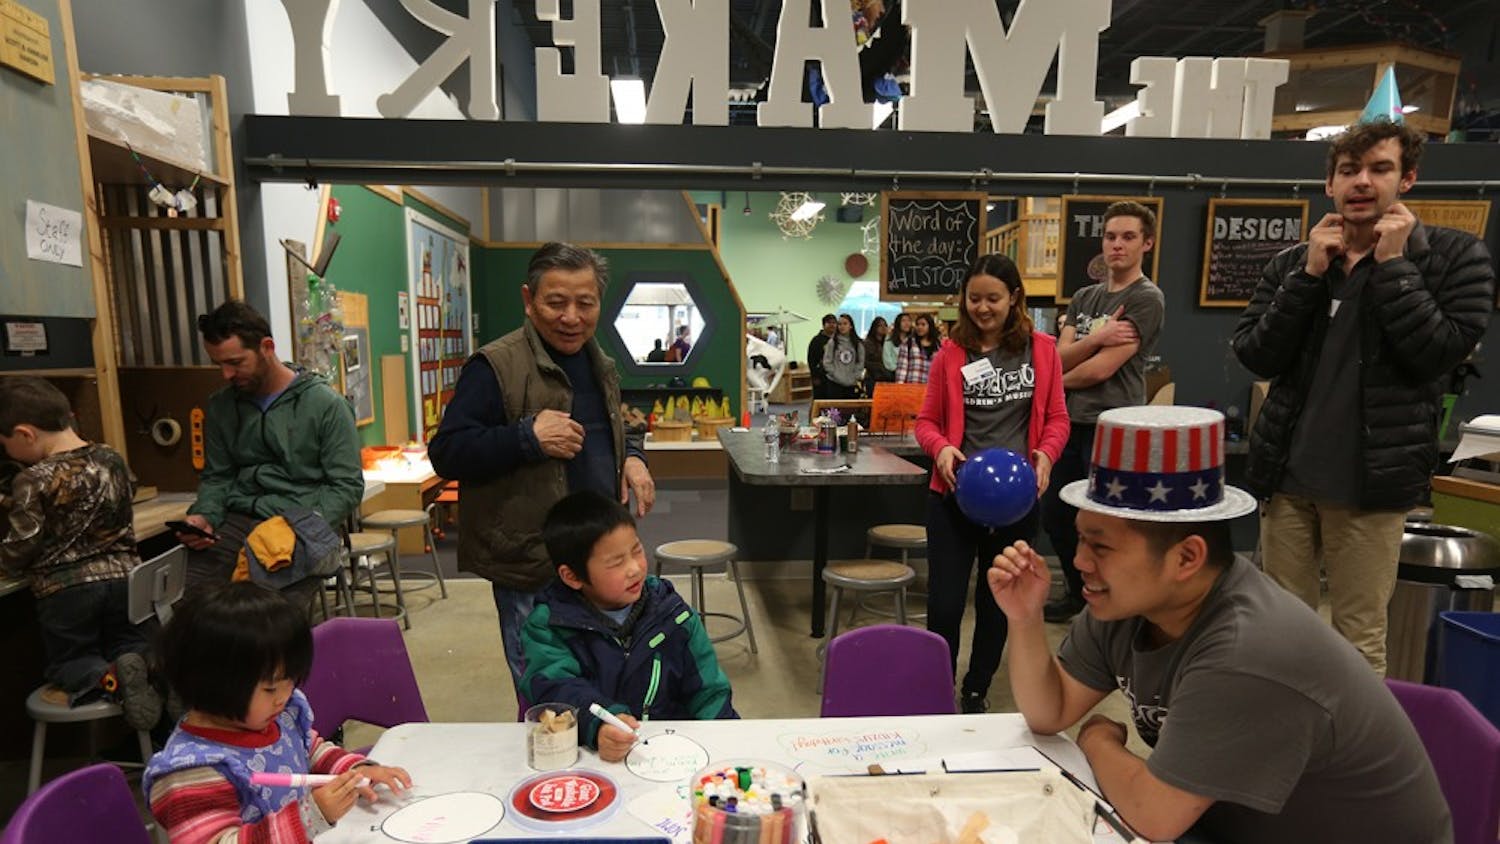 Kids do a coloring activity in celebration of Kidzu's 11th birthday as parents and counselors look on at University Mall on Sunday.